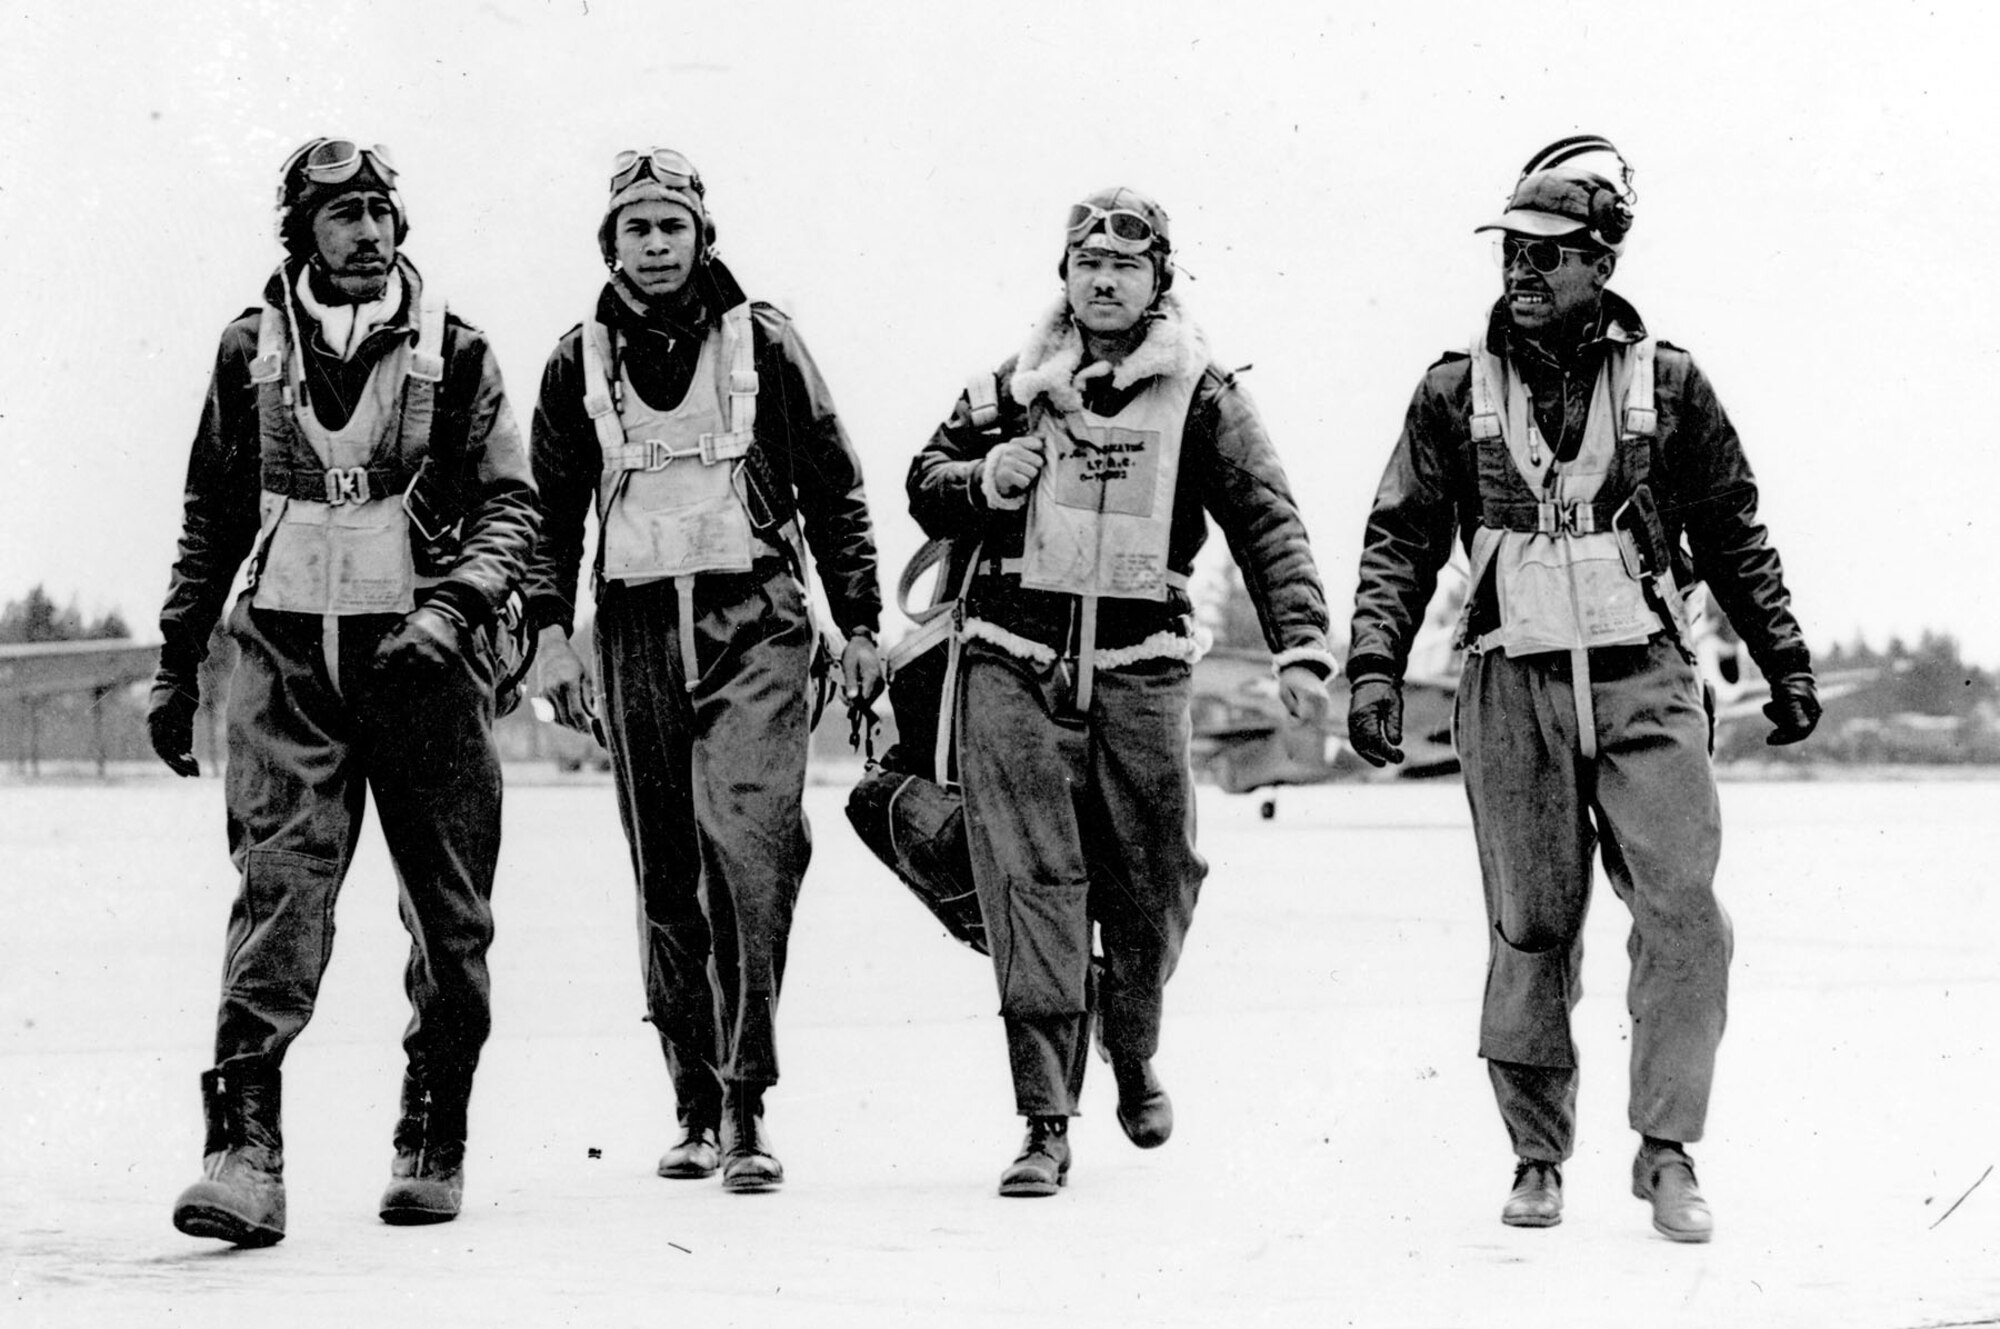 Advanced instruction turned student pilots into fighter pilots at Tuskegee Army Airfield, Ala. (U.S. Air Force photo)